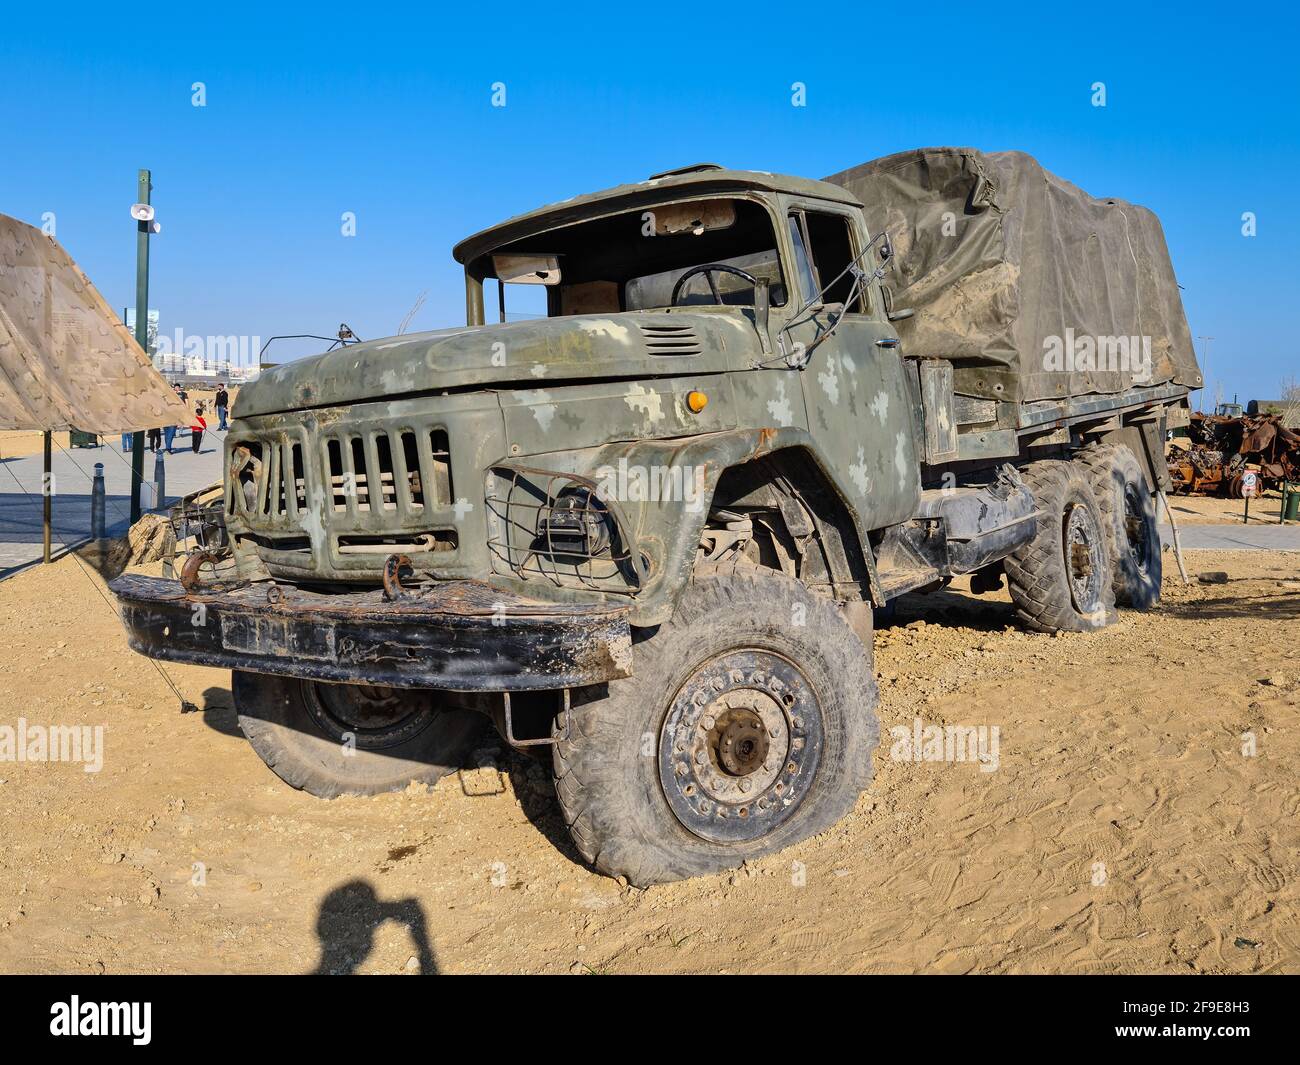 ZIL-1314 general purpose 3.5 tons 6x6 army truck designed in the Soviet Union, destroyed - Baku, Azerbaijan, 04-16-2021 Stock Photo